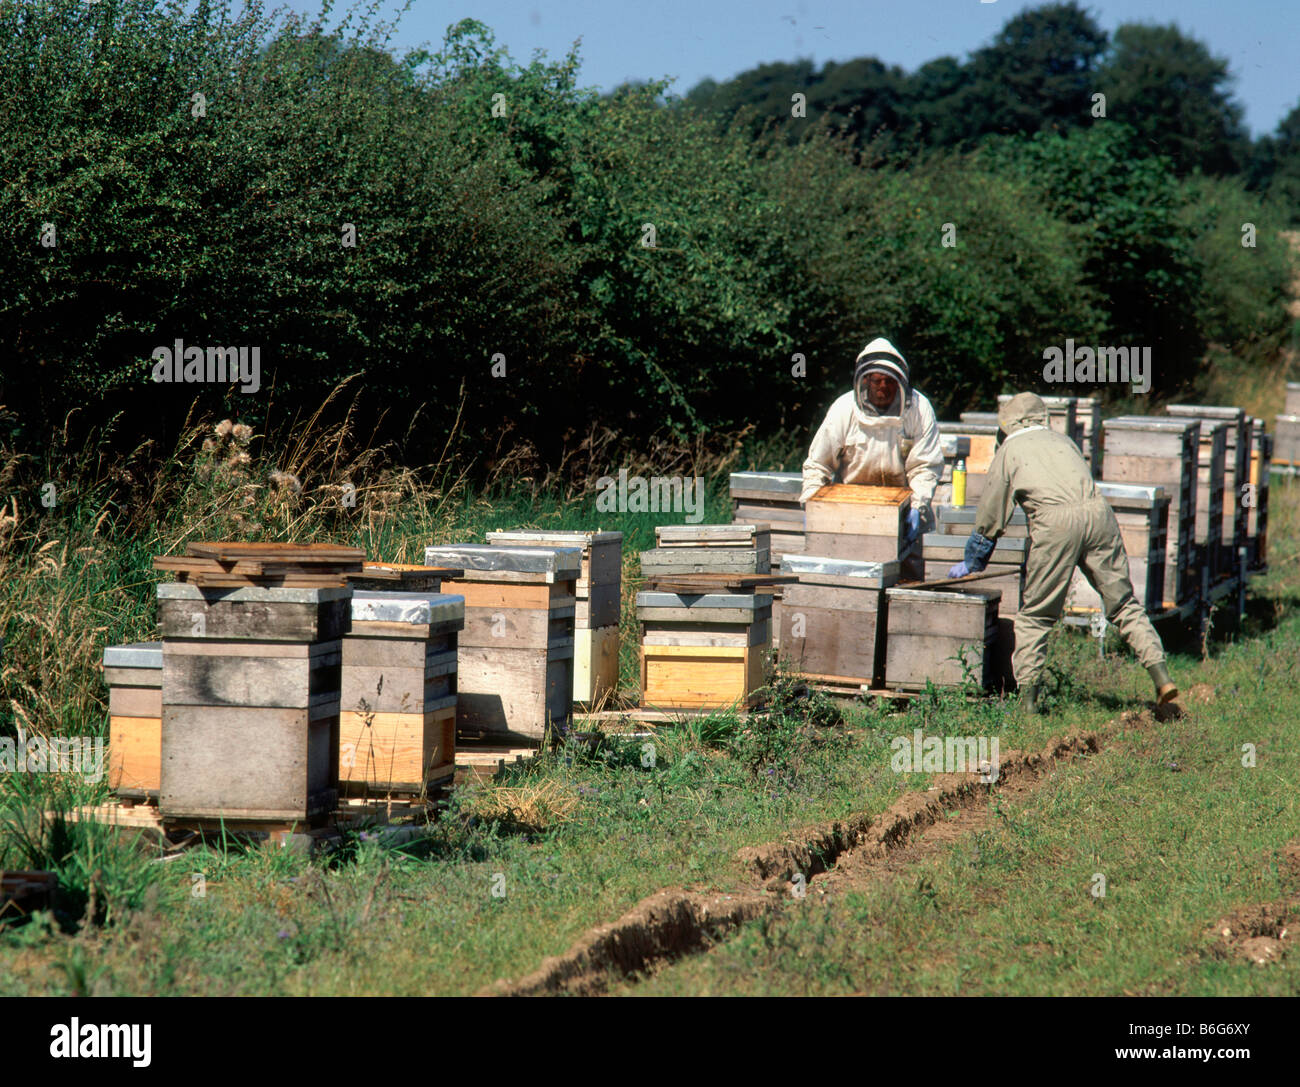 Beekeepers collecting the honey harvest from their hives set up in a farmers field in the Lincolshire Wolds England Stock Photo